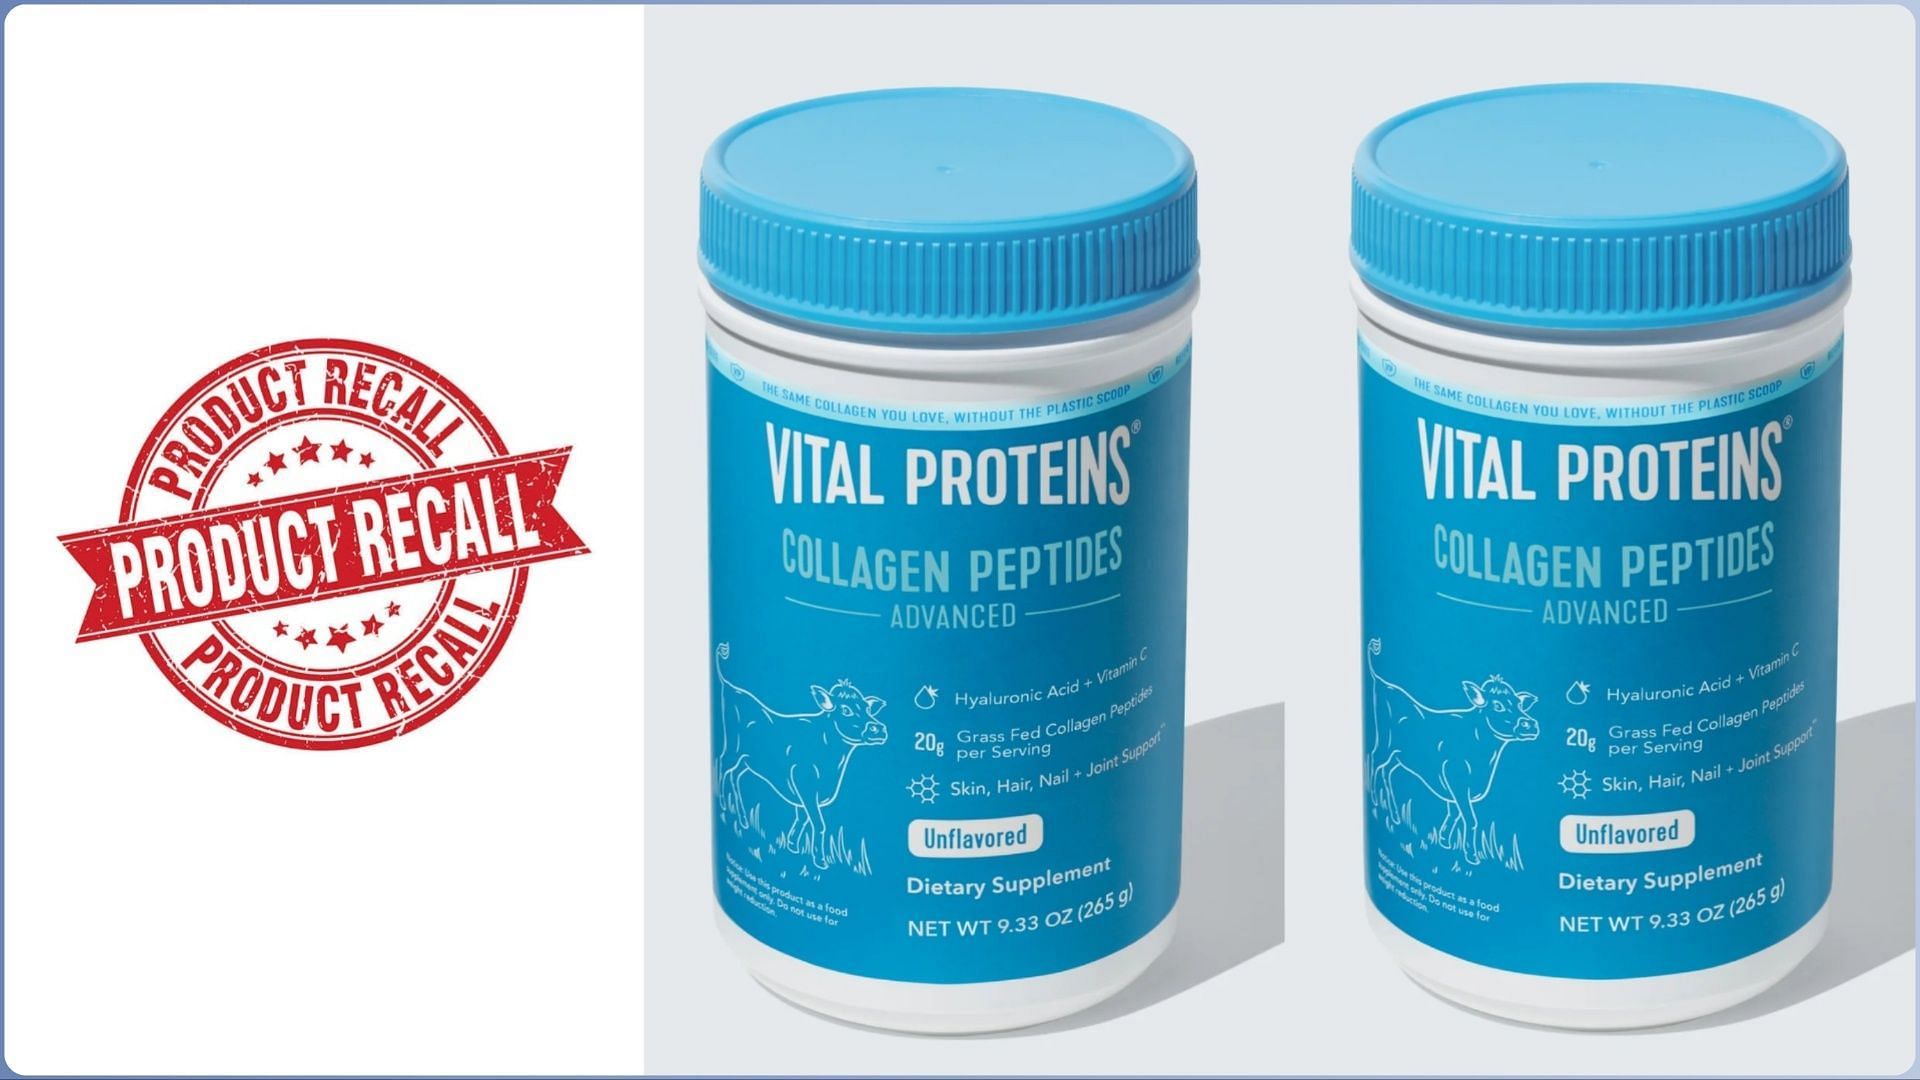 Vital Proteins Collagen Peptides recall: reason, affected states ...